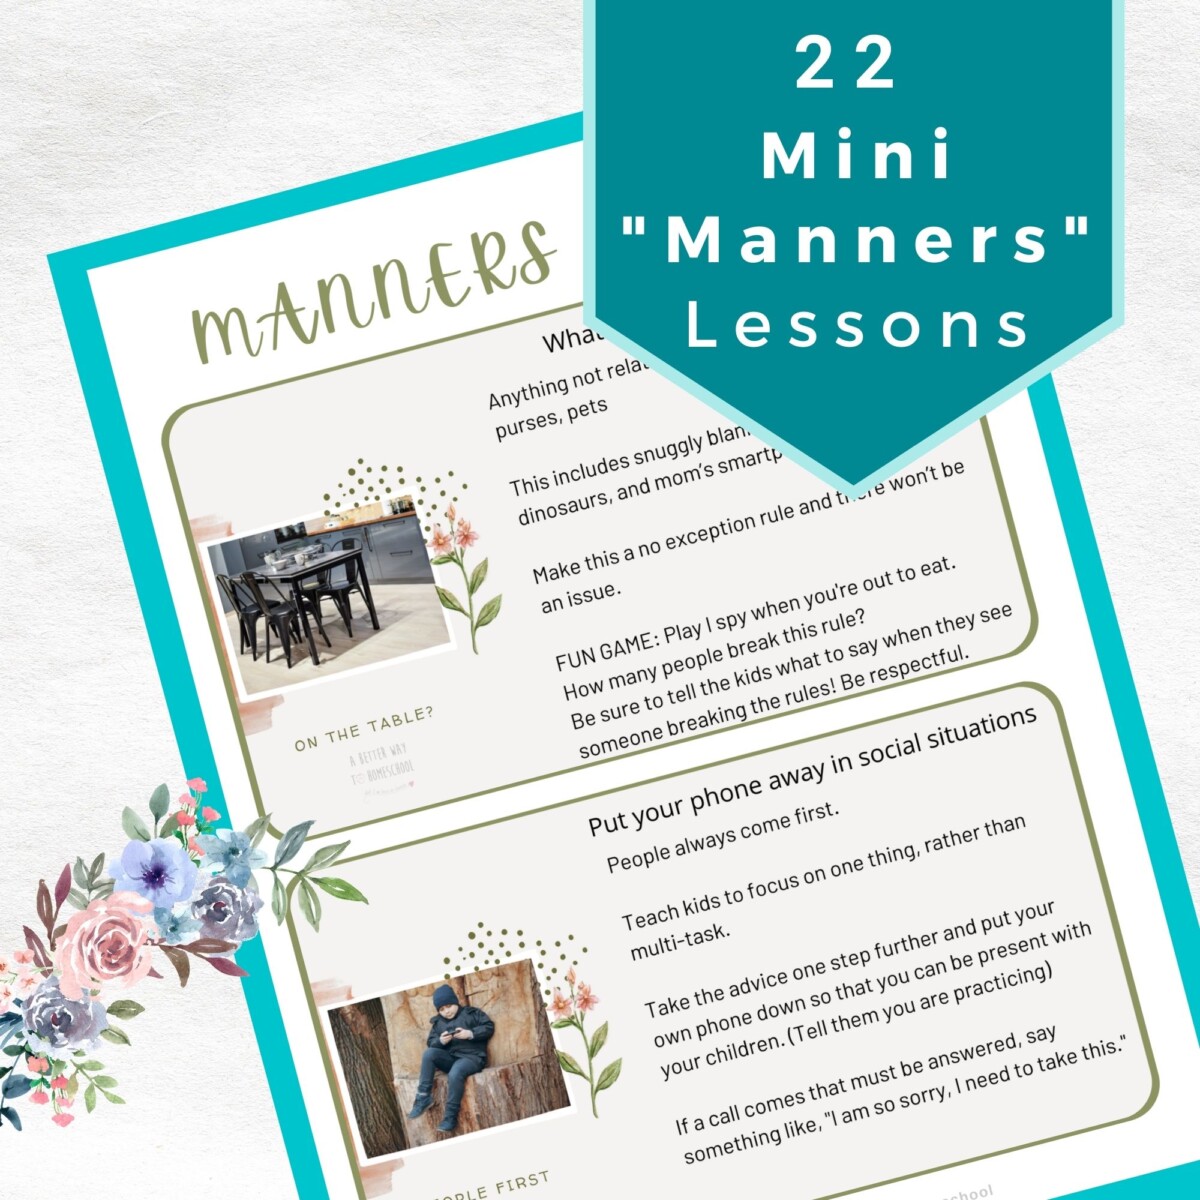 image of manners printable with title 22 mini manners lessons